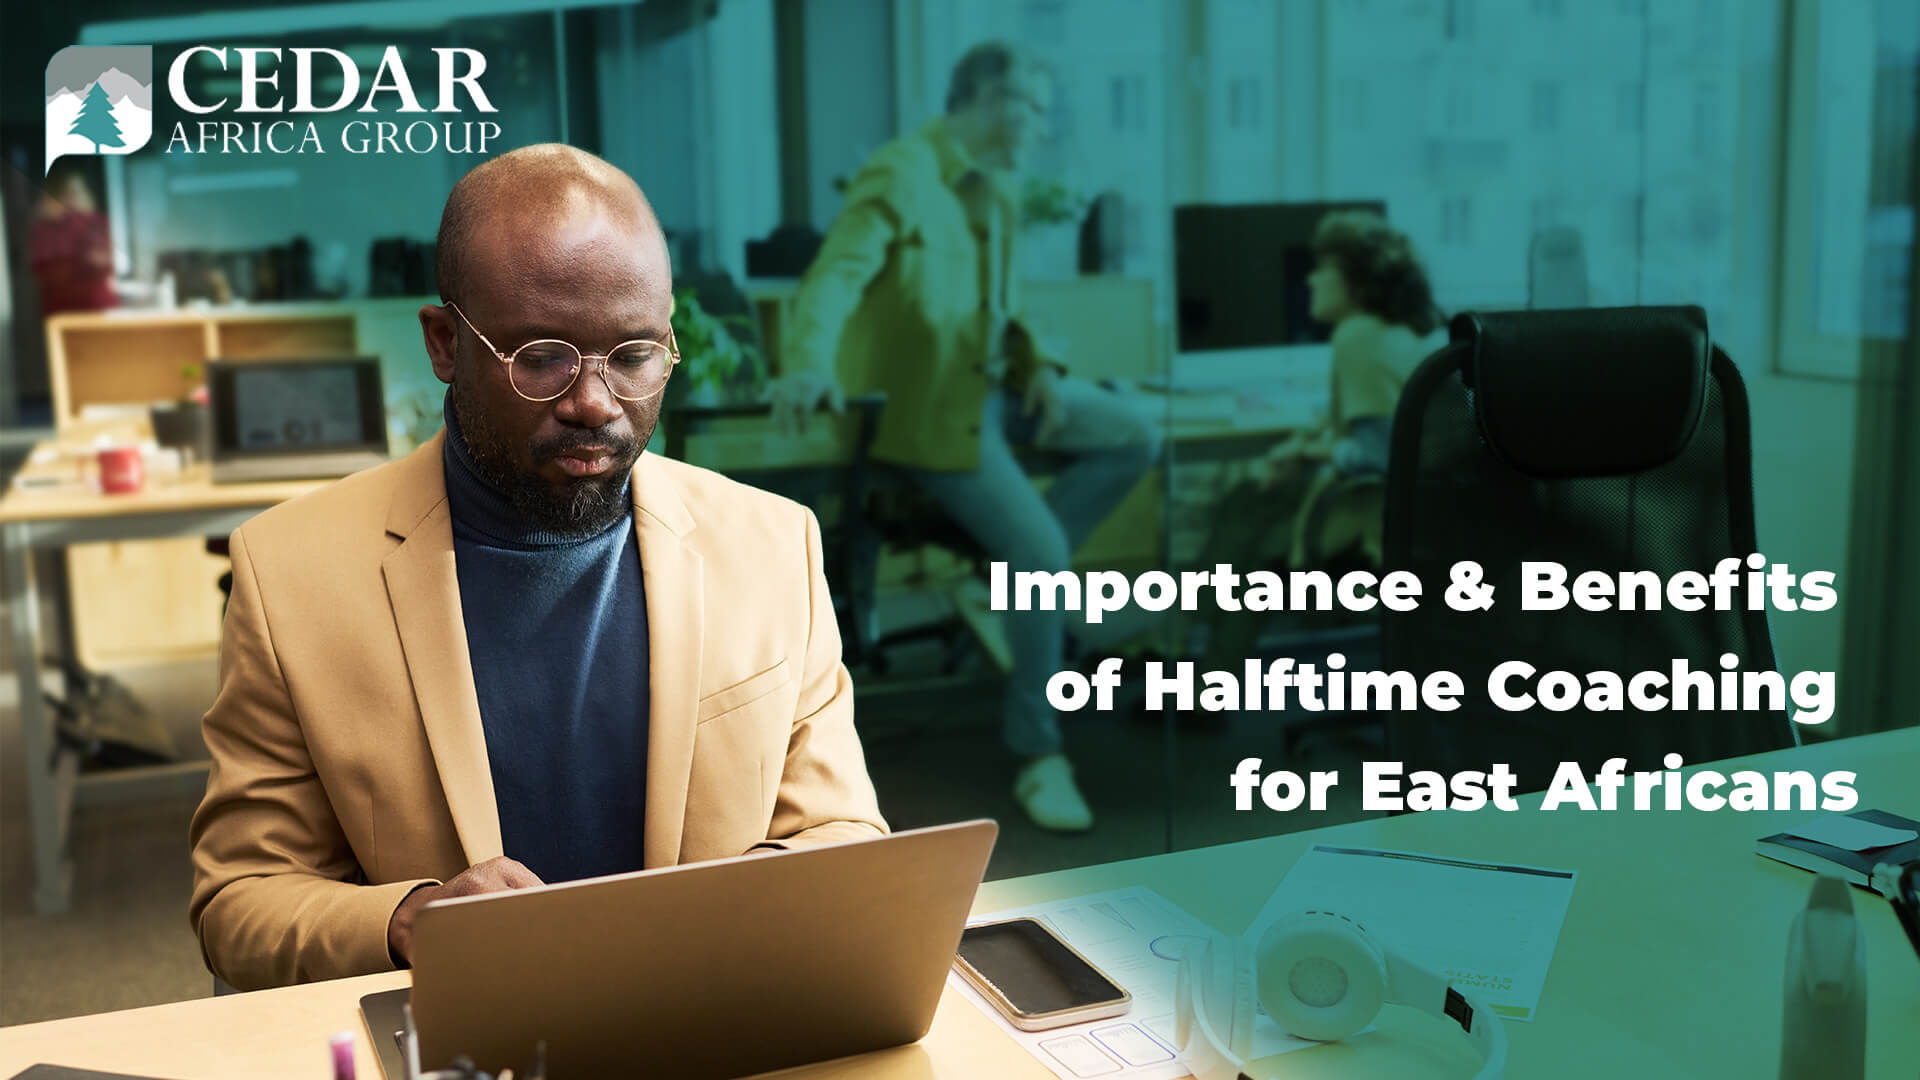 Importance and benefits of halftime coaching for East Africans